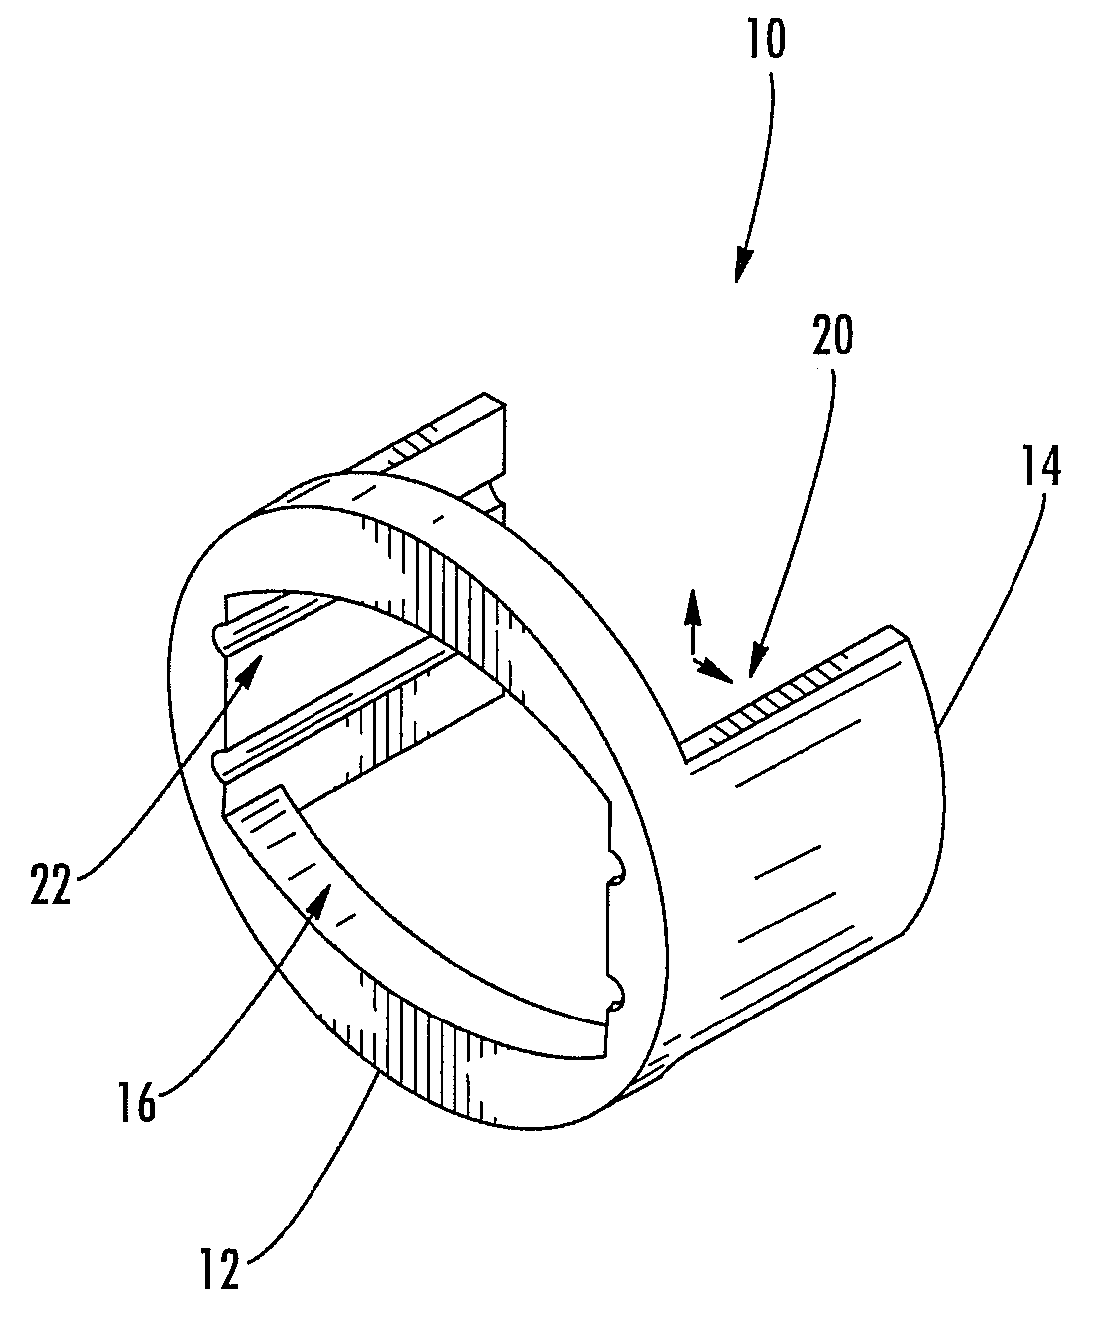 Anterior cervical spine instrumentation and related surgical method